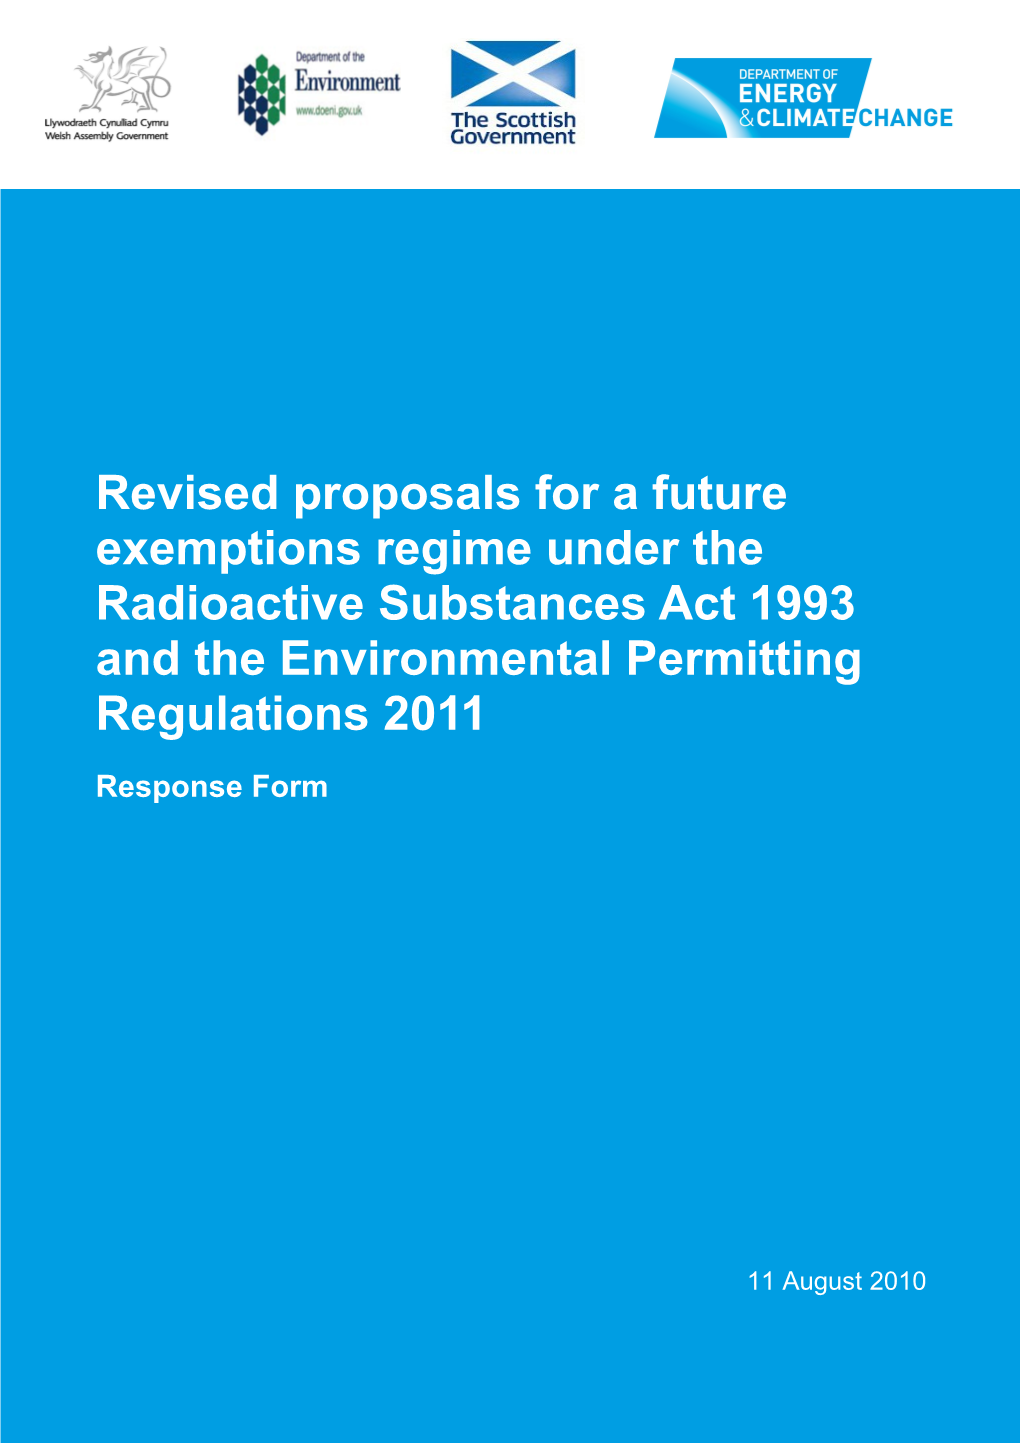 Revised Proposals for a Future Exemptions Regime Under the Radioactive Substances Act